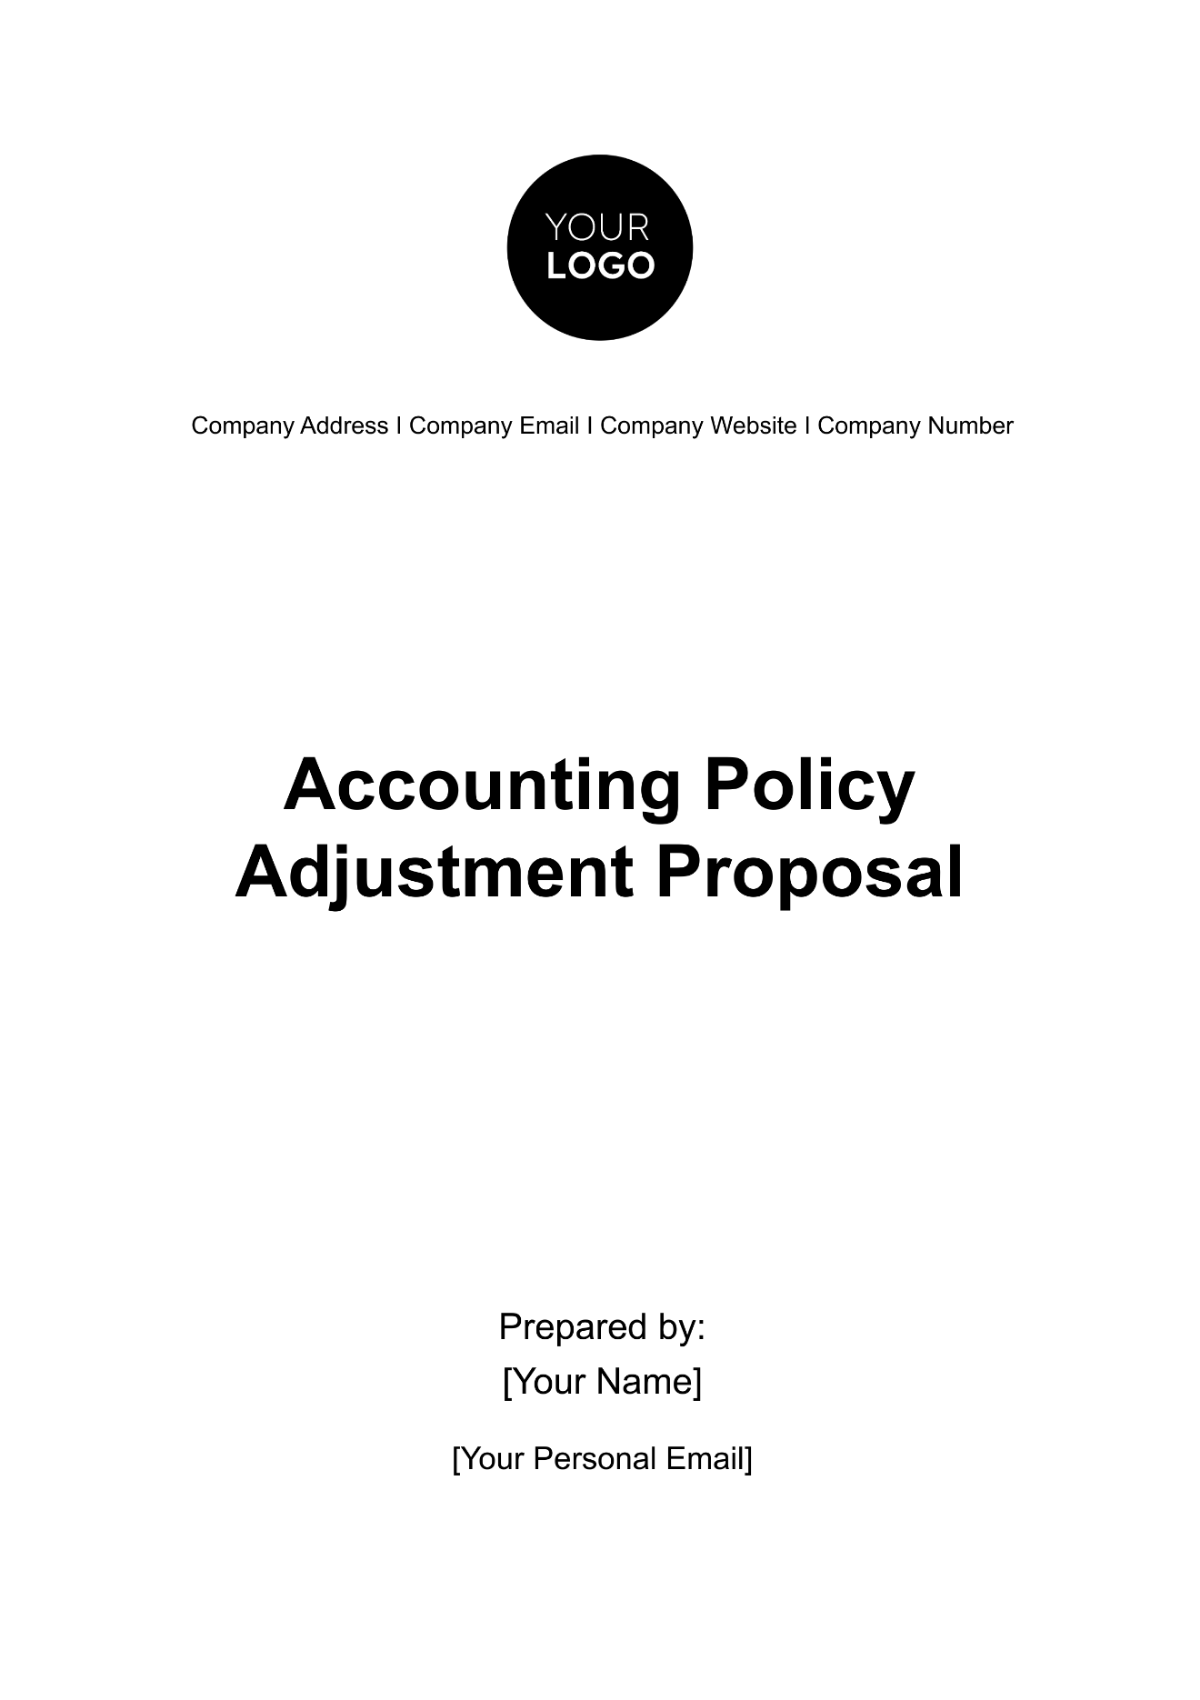 Free Accounting Policy Adjustment Proposal Template